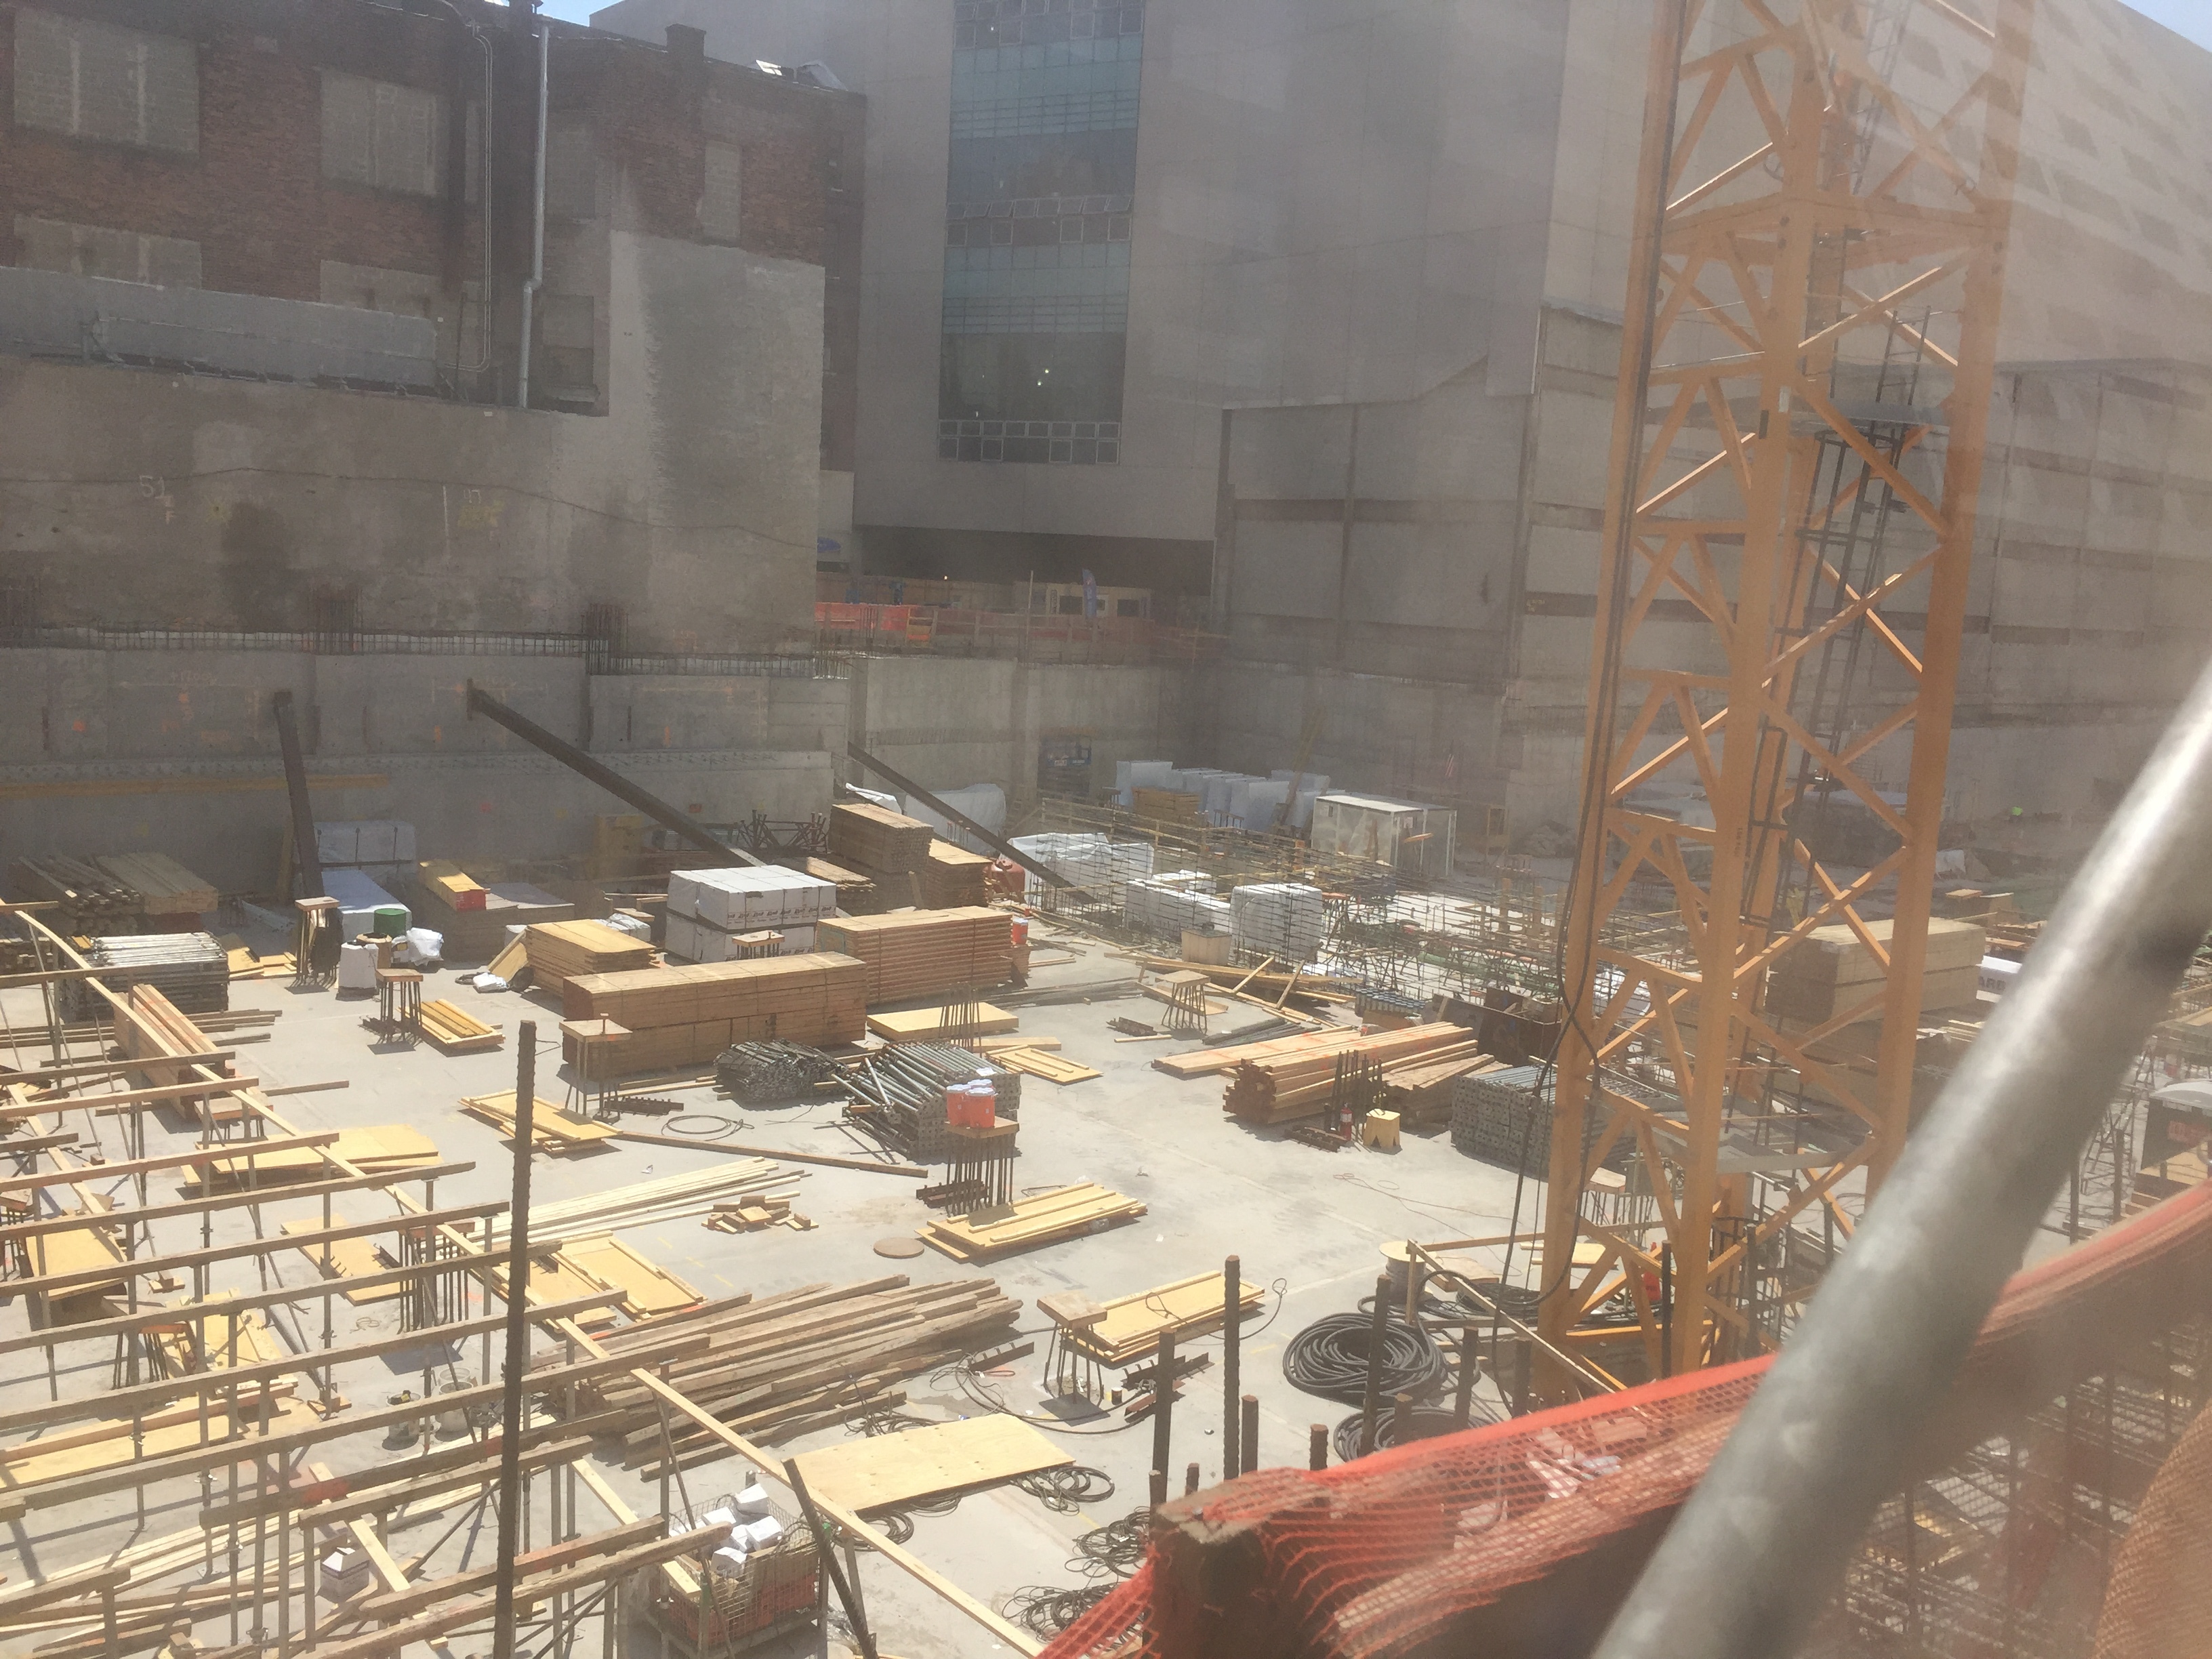 Work at 606 West 57th Street, June 25, 2016. Credit: JC_Heights